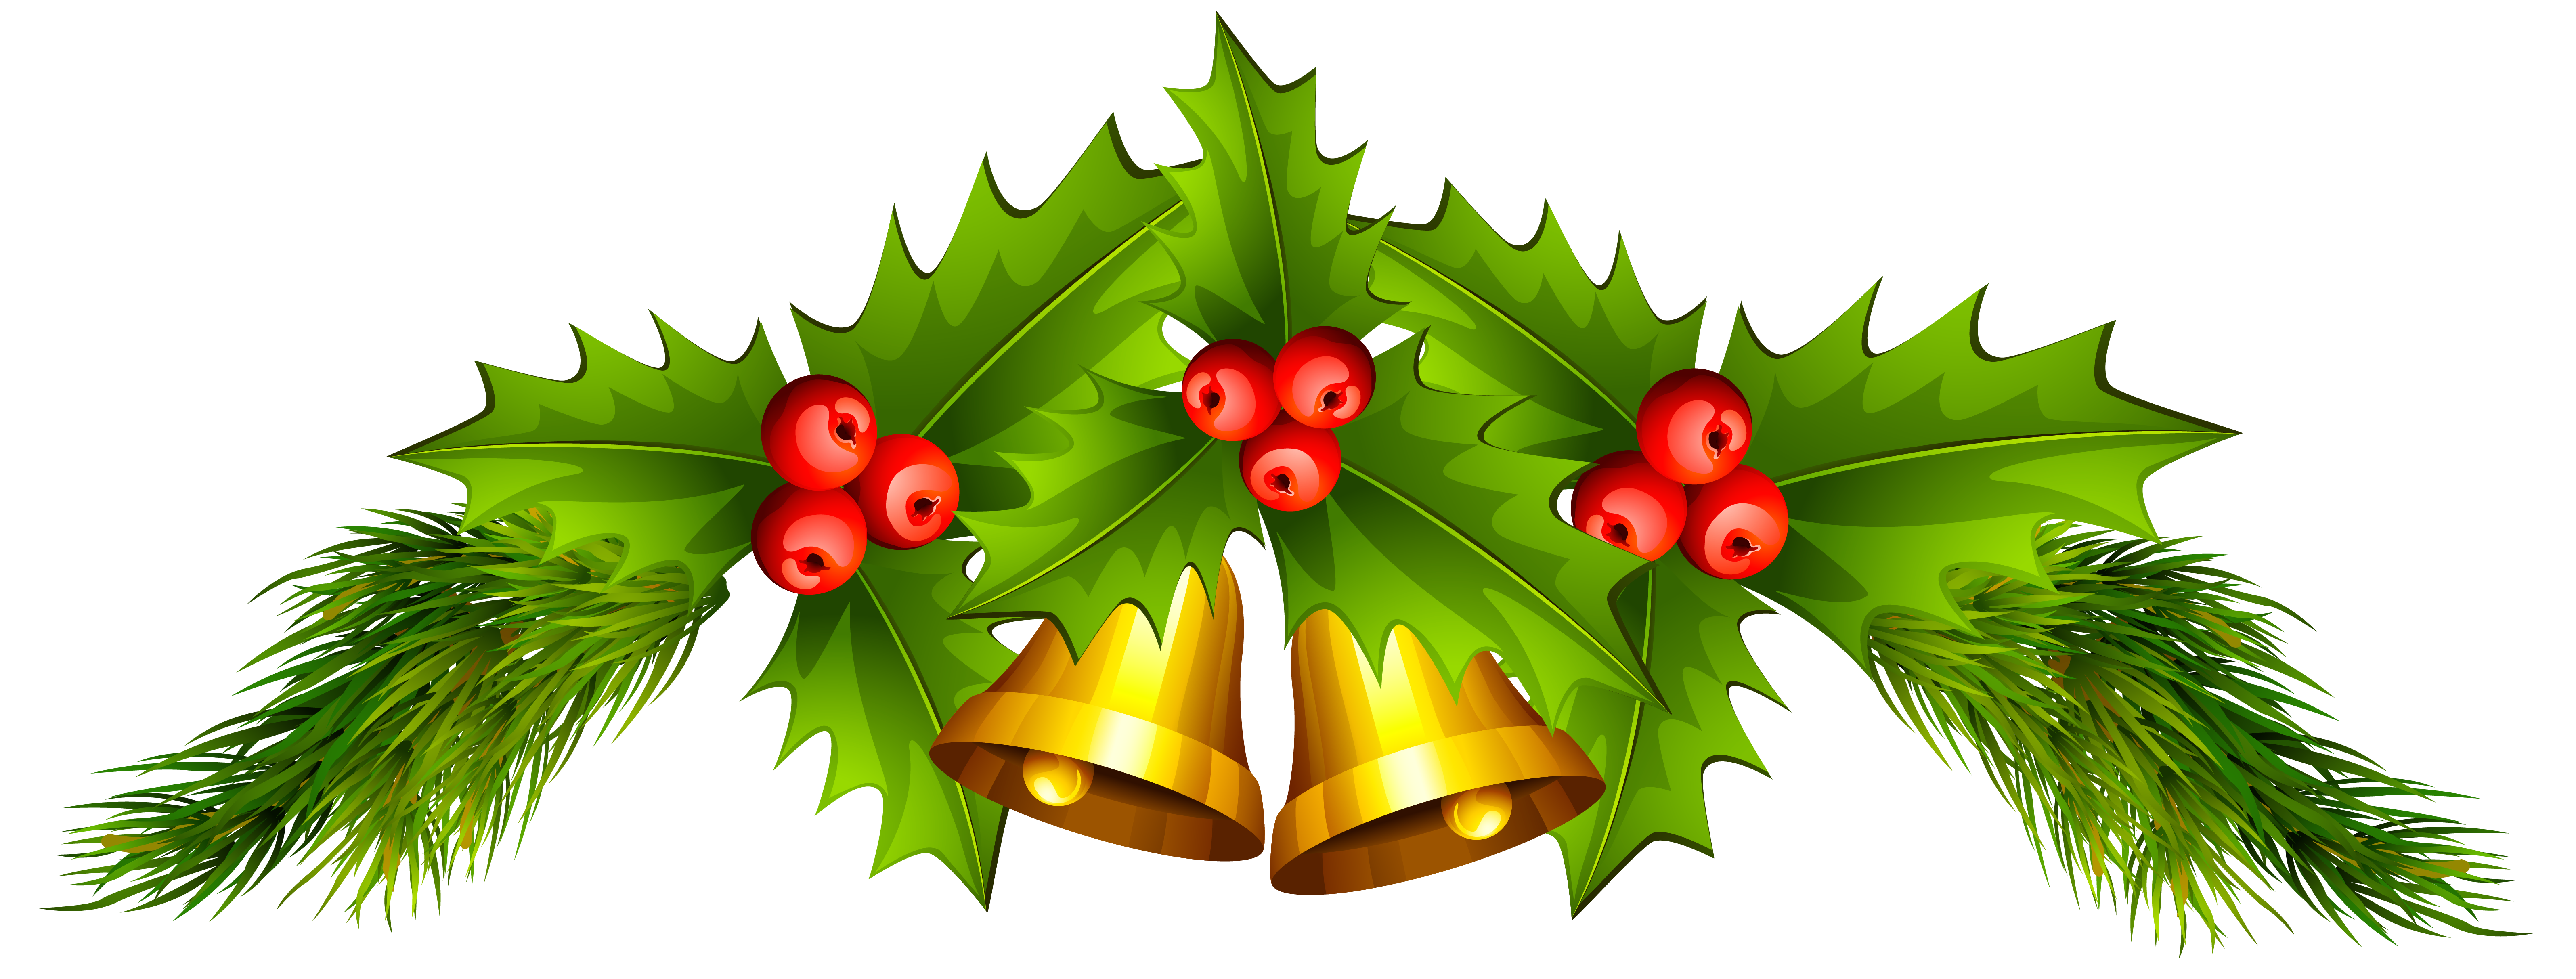 free clipart christmas bell - photo #44